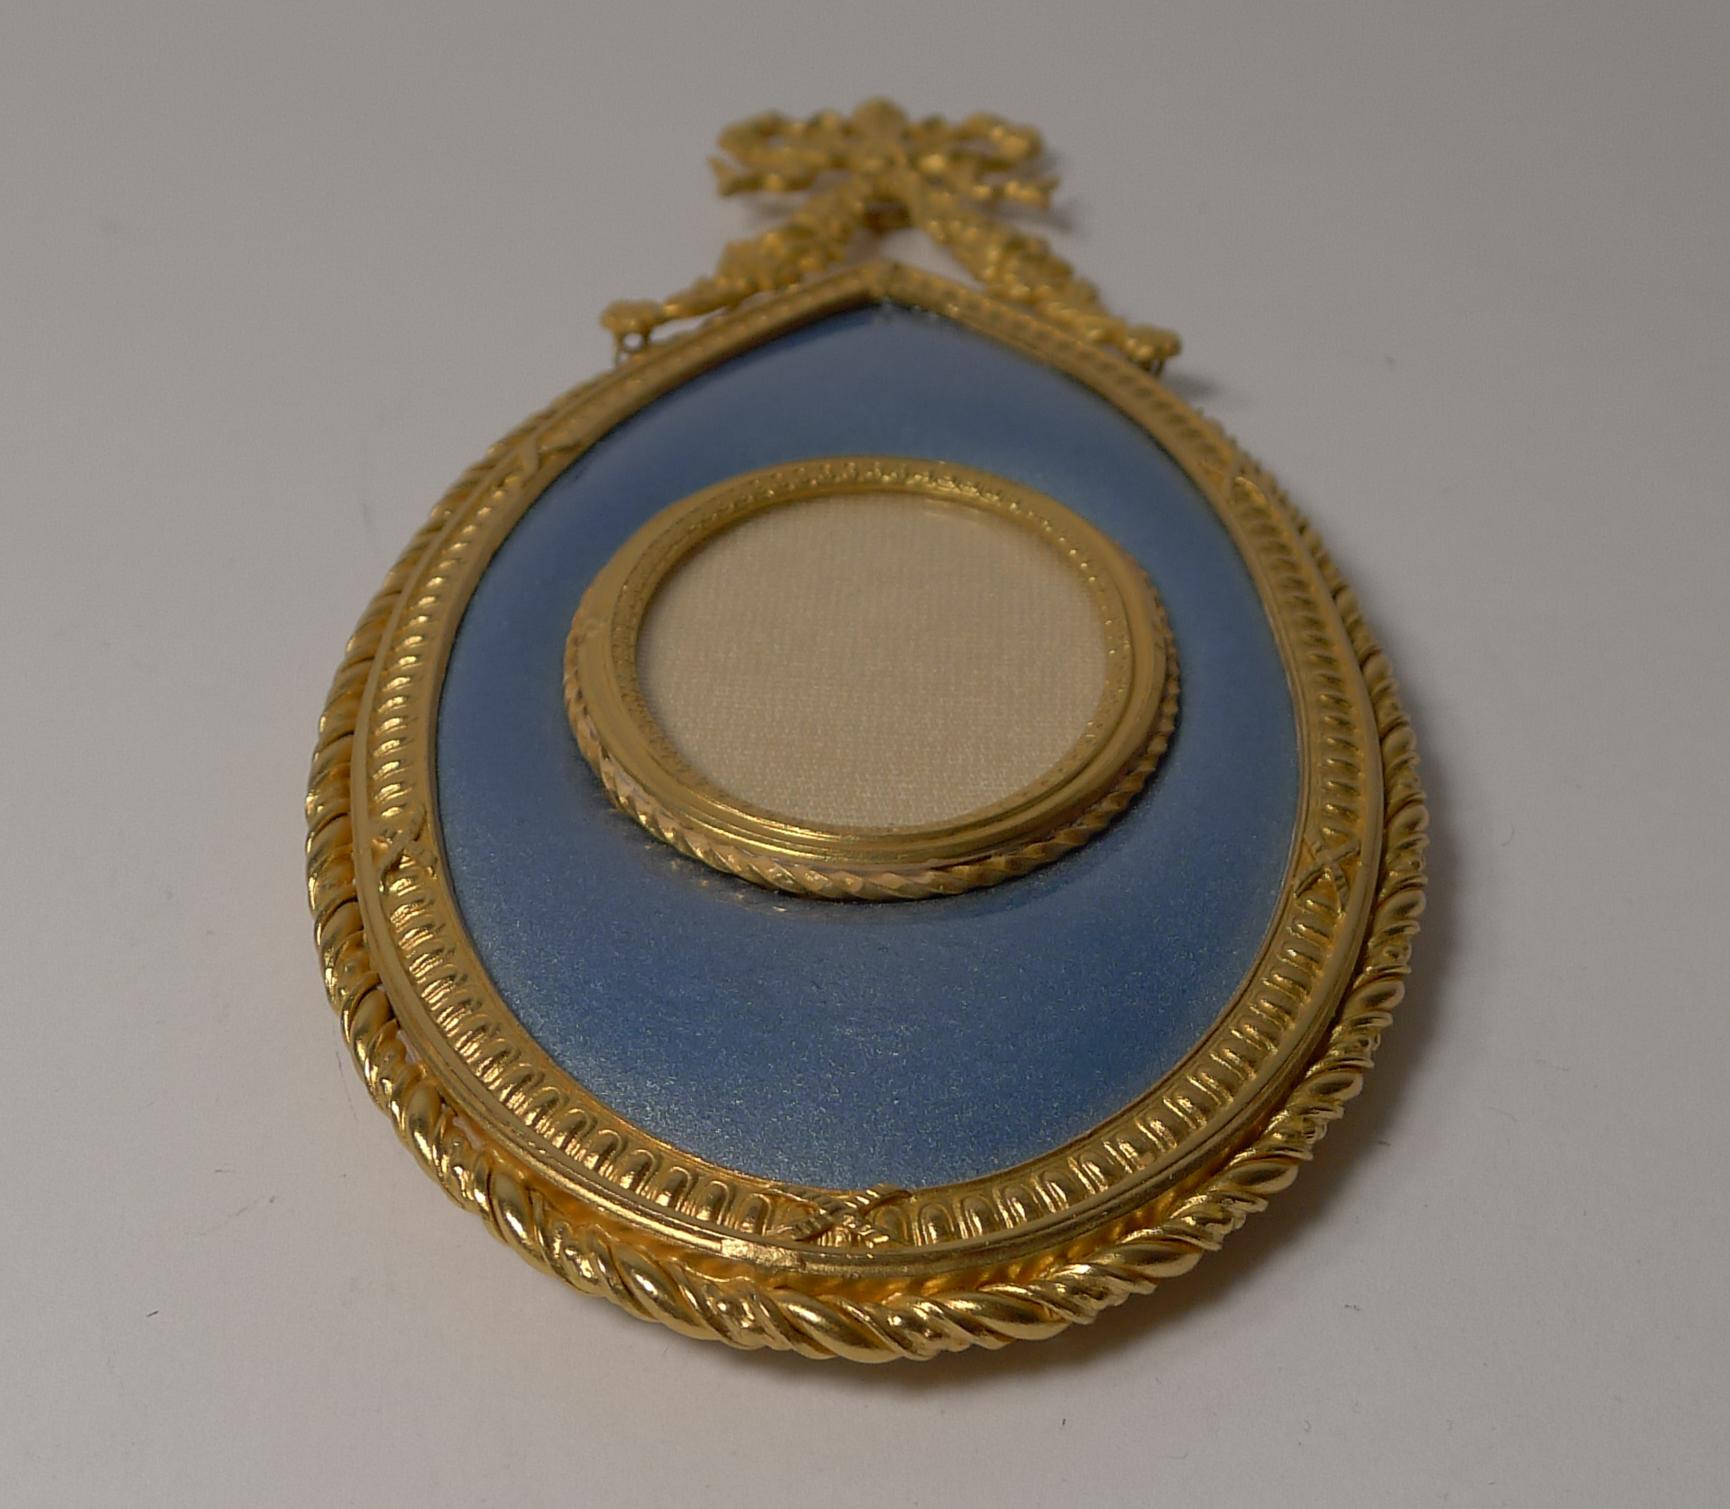 The front is inset with a fabulous blue enamel panel surrounding the central oval aperture. There is small ring to the back where the frame is hung on the wall.

Dating to circa 1900 it remains in superb condition having been fully restored to its